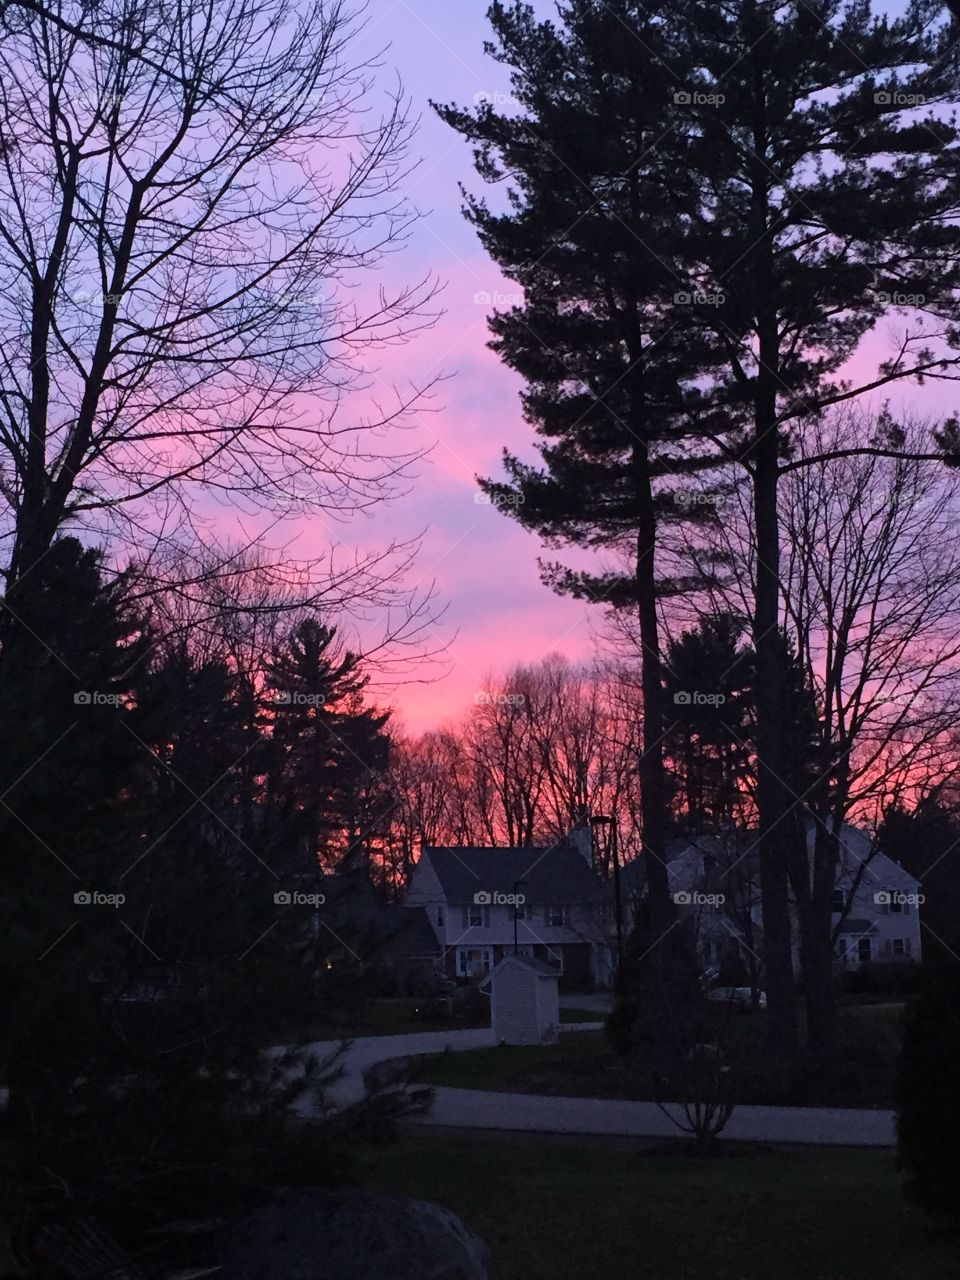 Sunset in Stratham NH